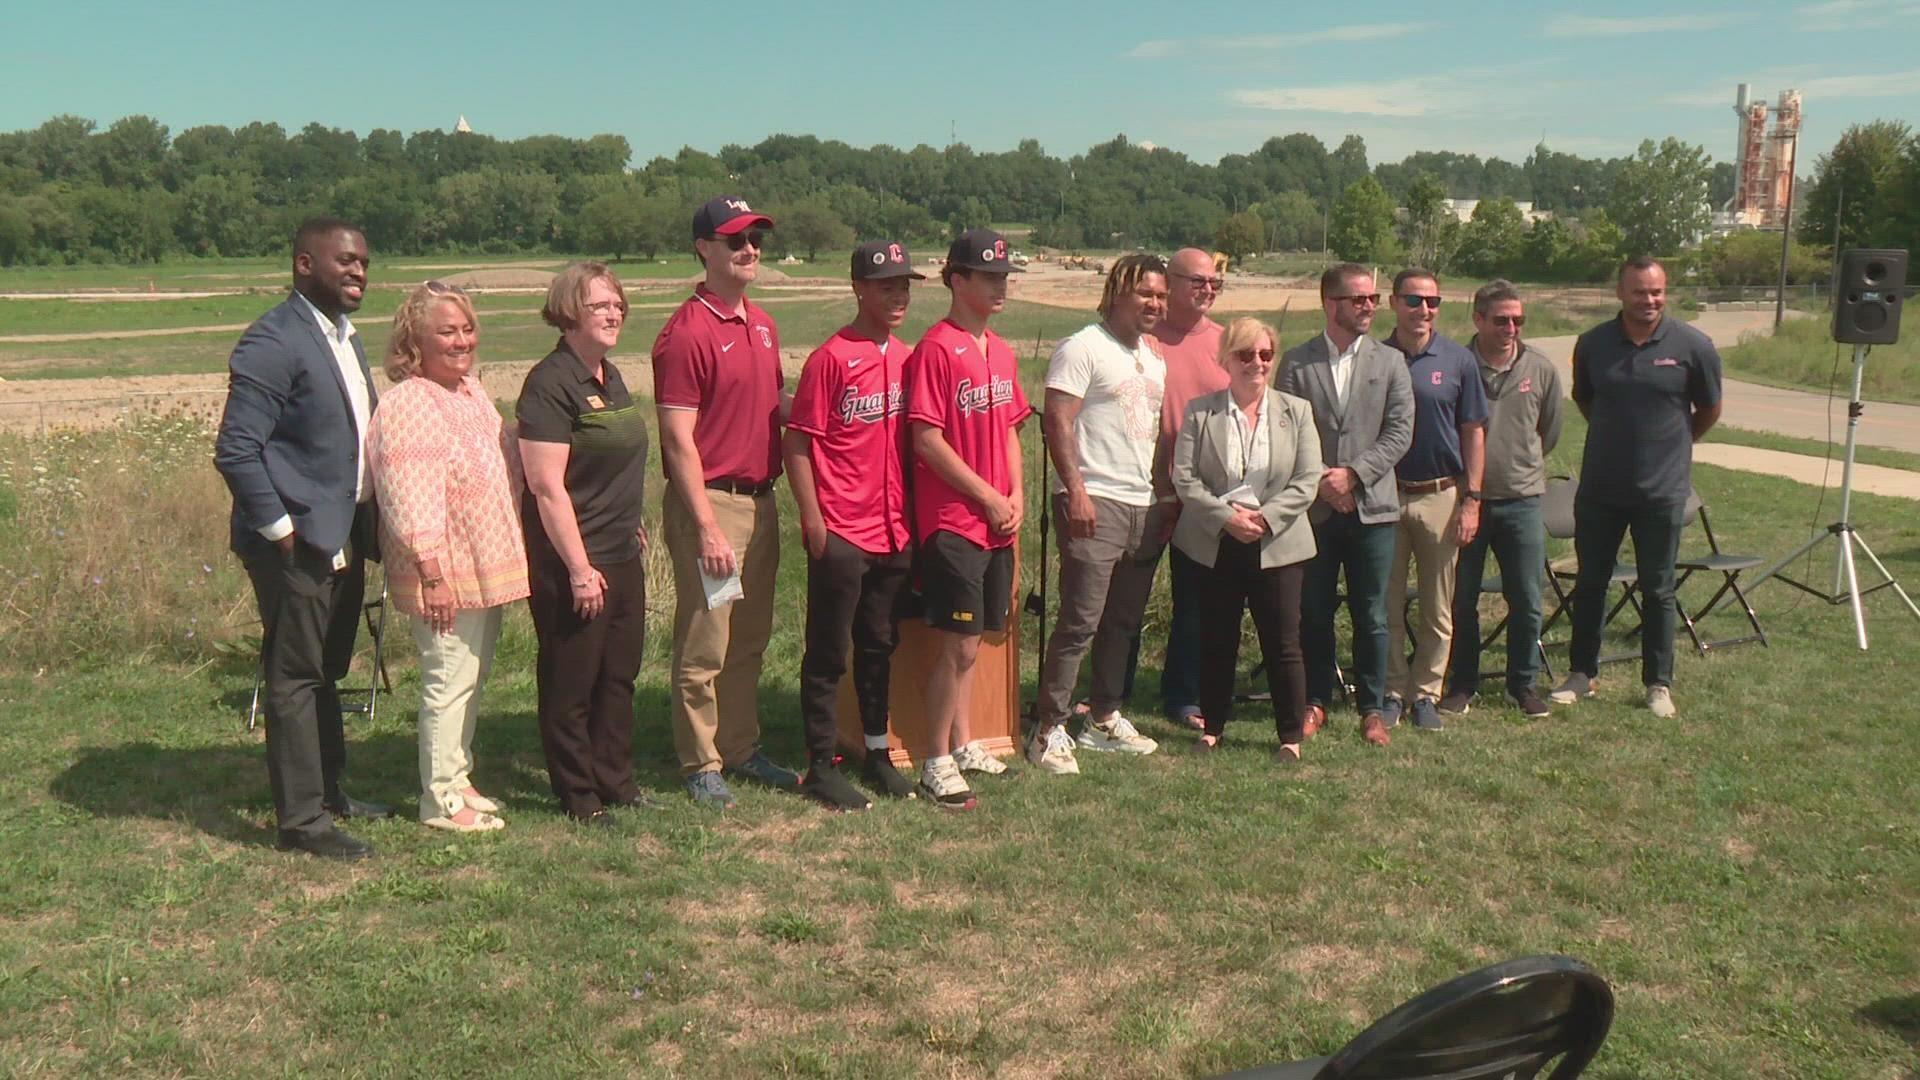 On Wednesday, Cleveland Guardians Charities will announce plans fo a new Fields for the Future project at Clark Field.